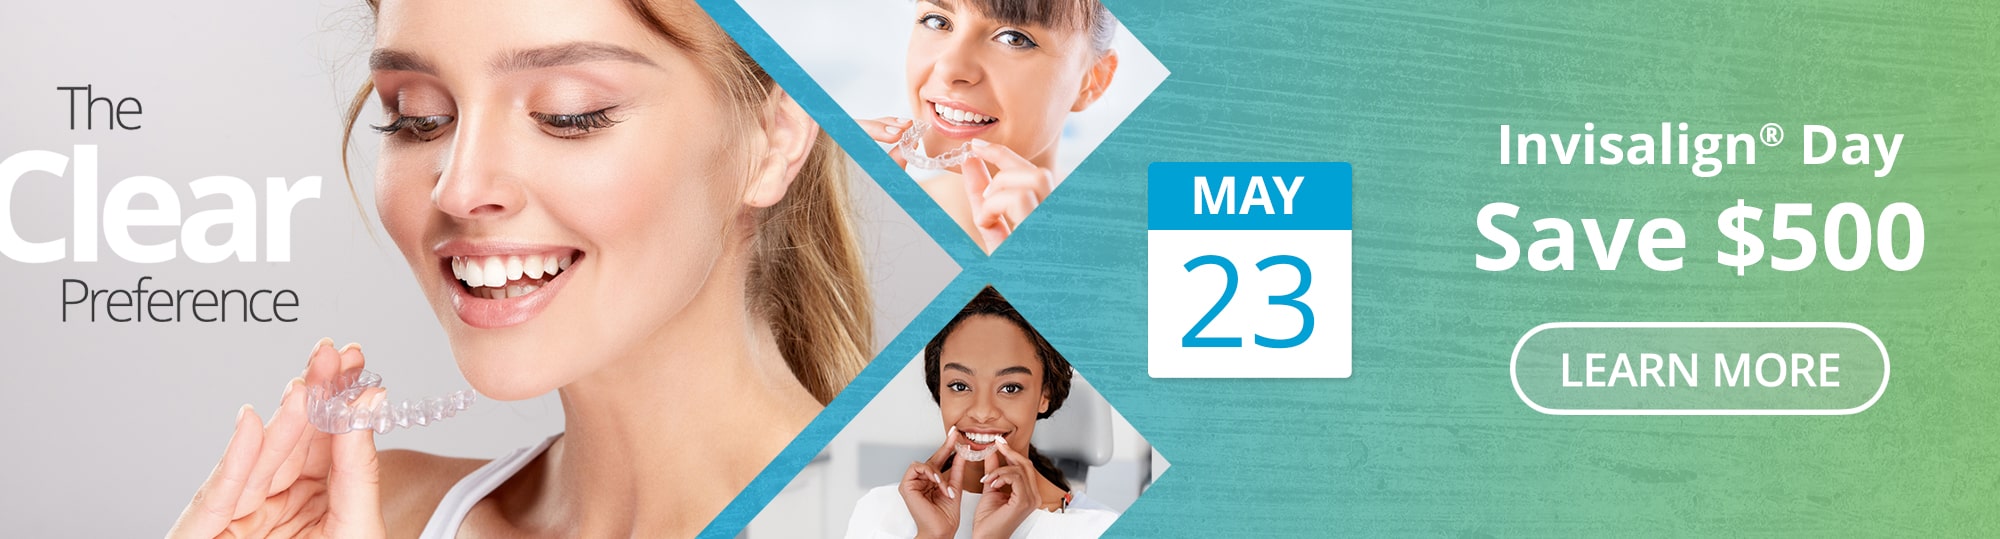 invisalign day offer may 23 learn more